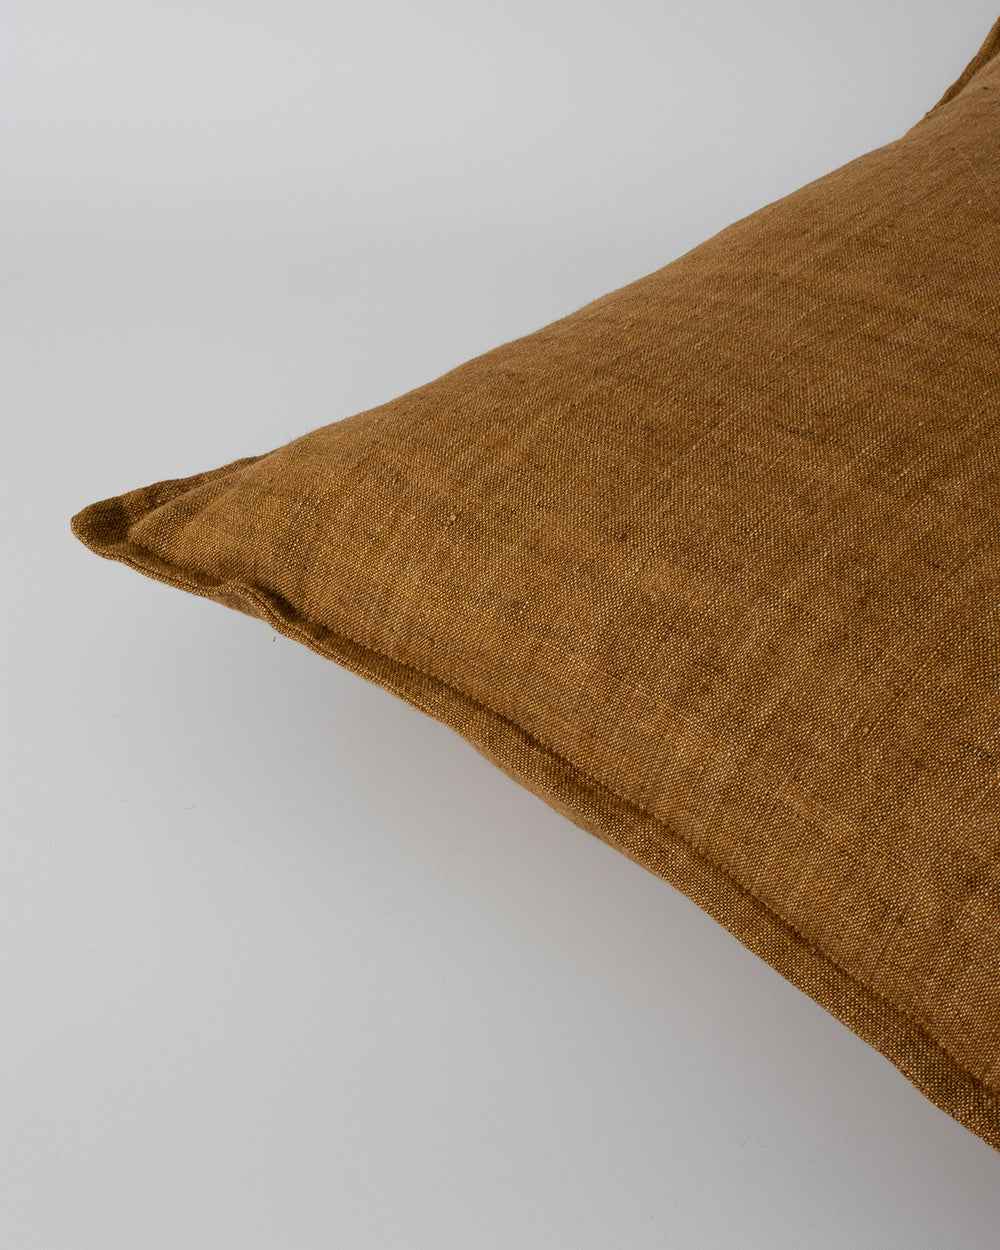 Cassia Linen Cushion - Feather Inner - Tobacco